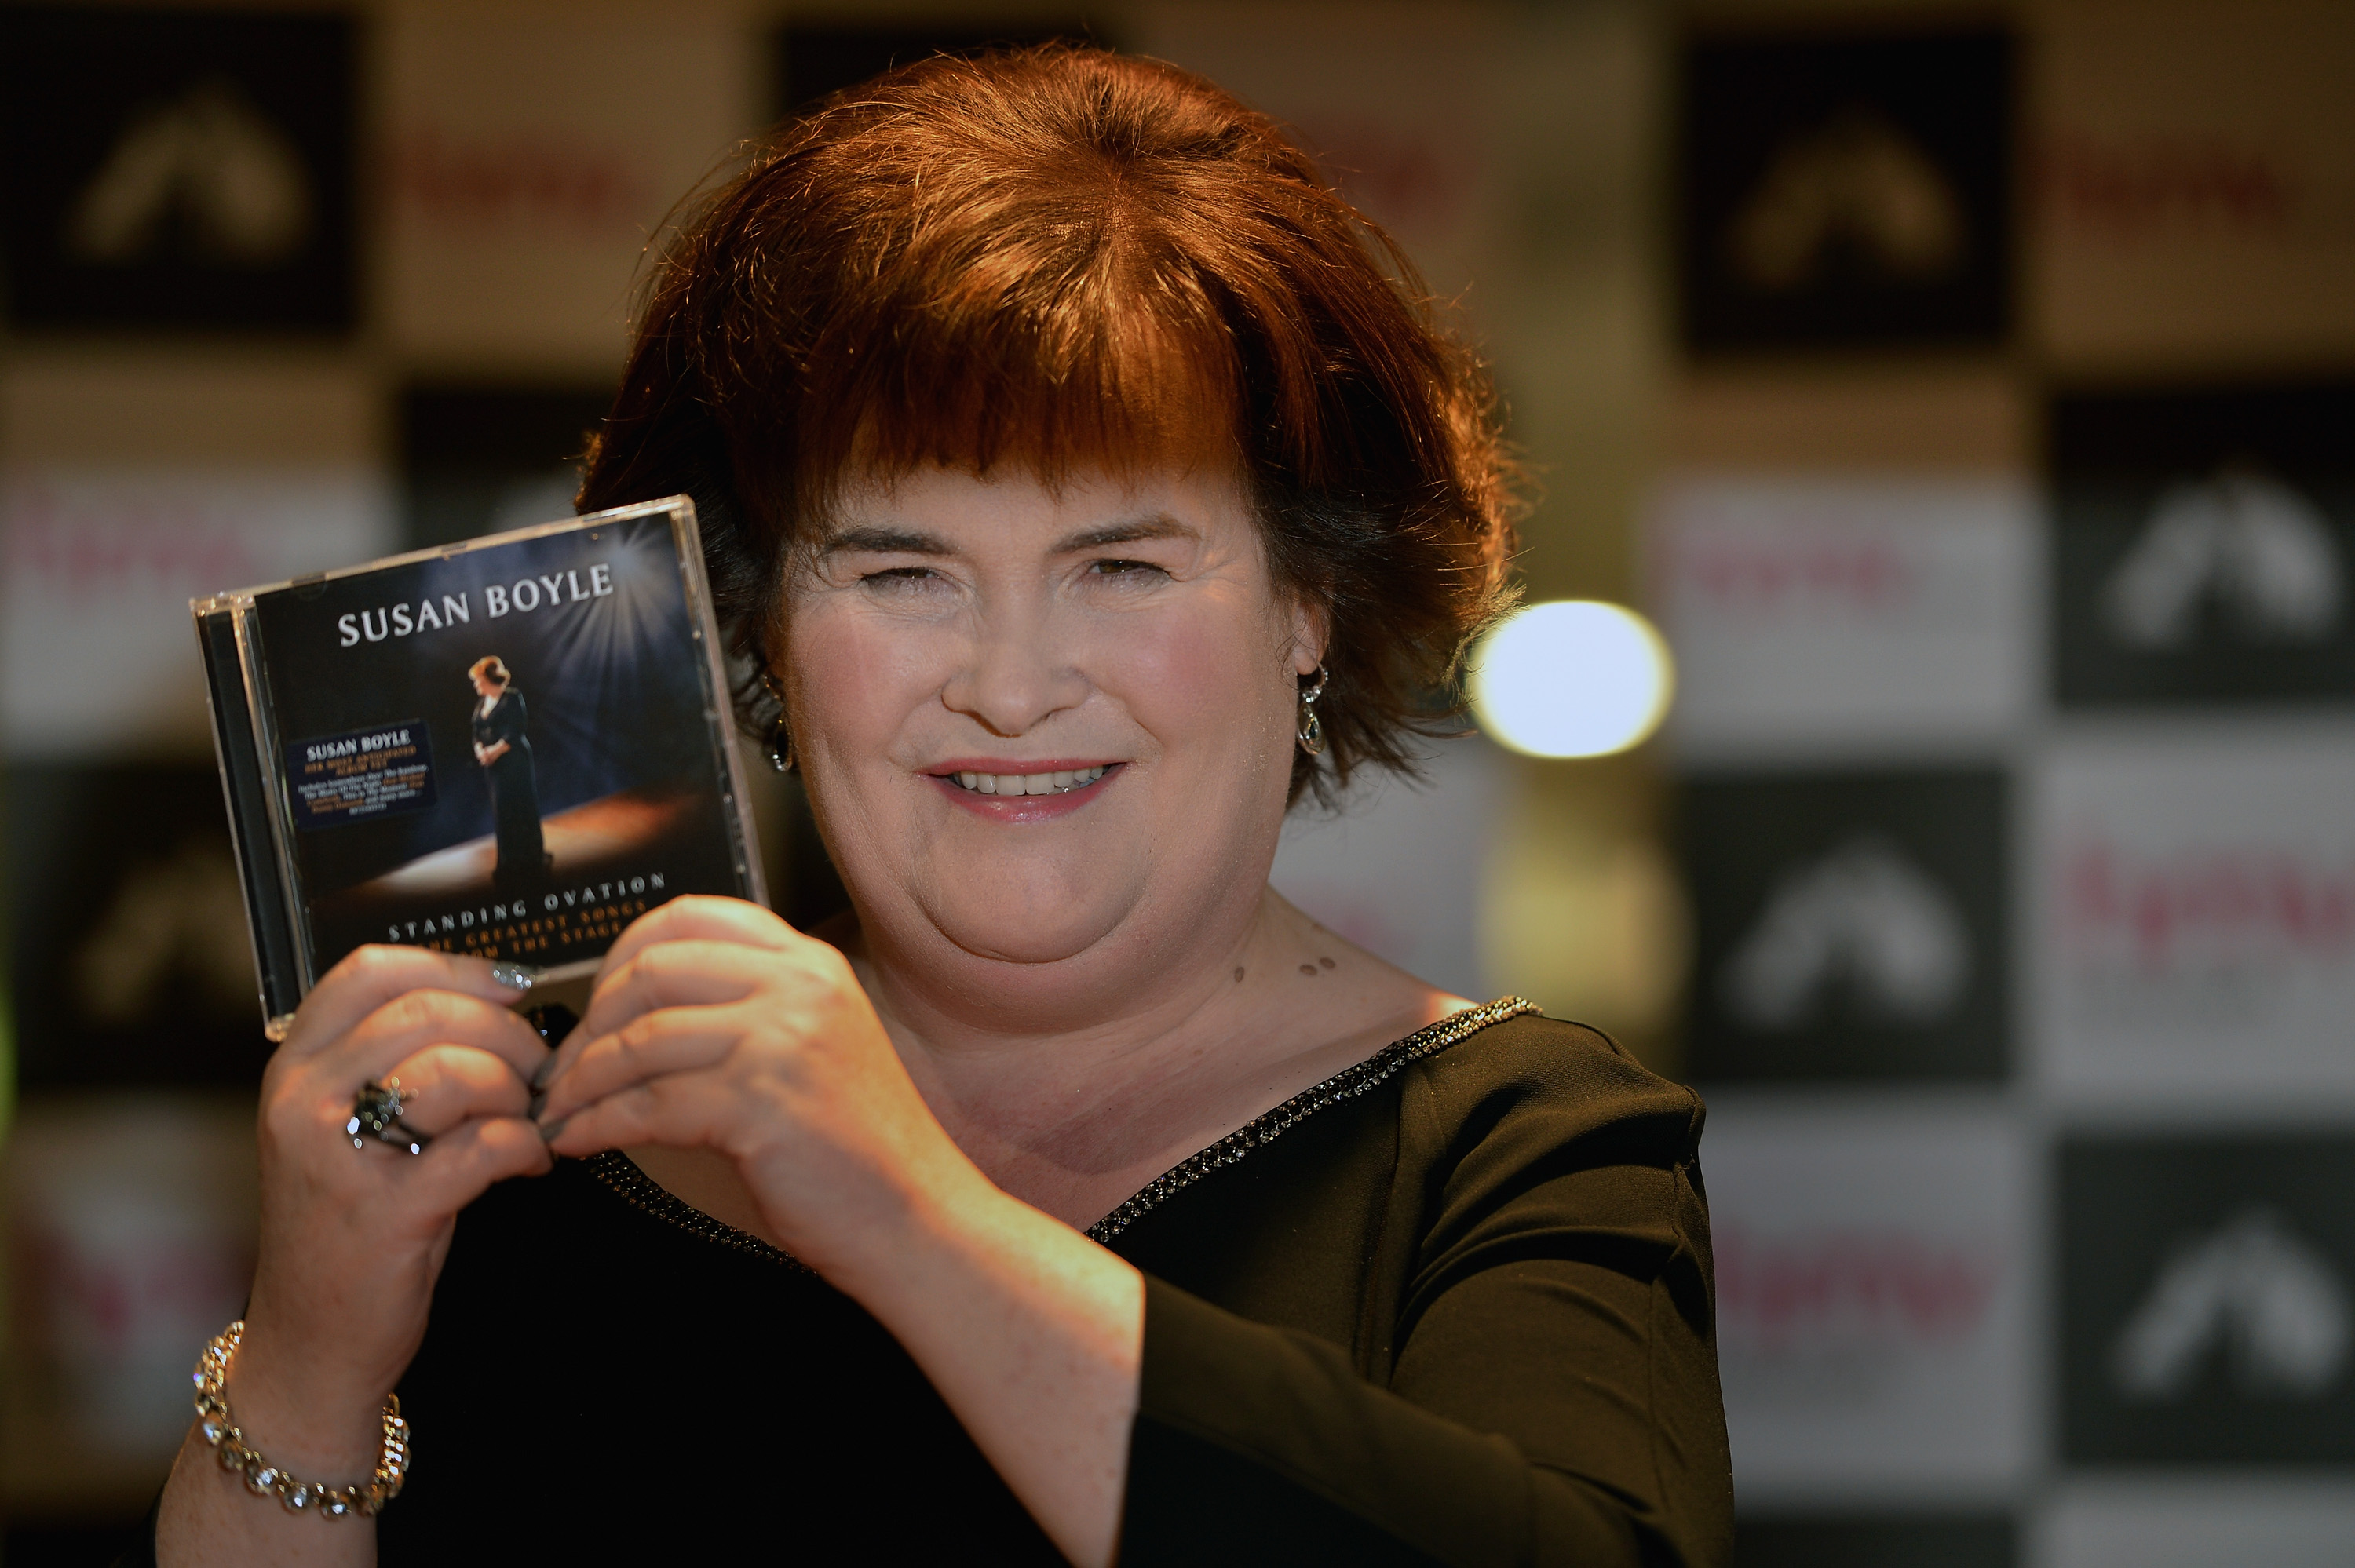 Susan Boyle attends an album signing on November 20, 2012 in Glasgow, Scotland | Source: Getty Images